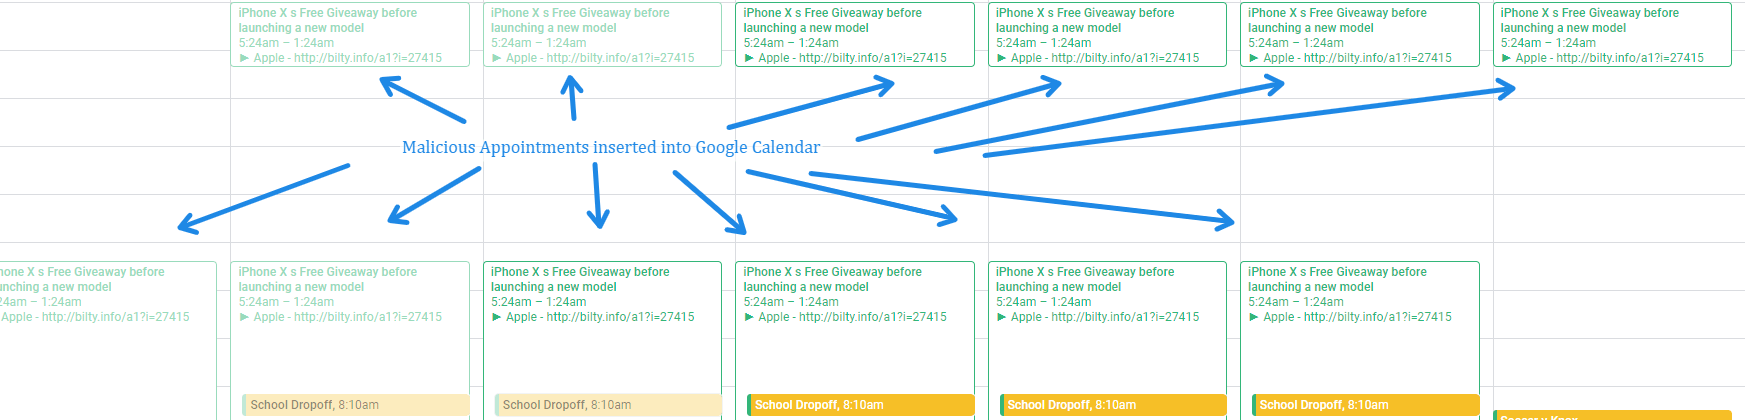 spam appointments in Google Calendar